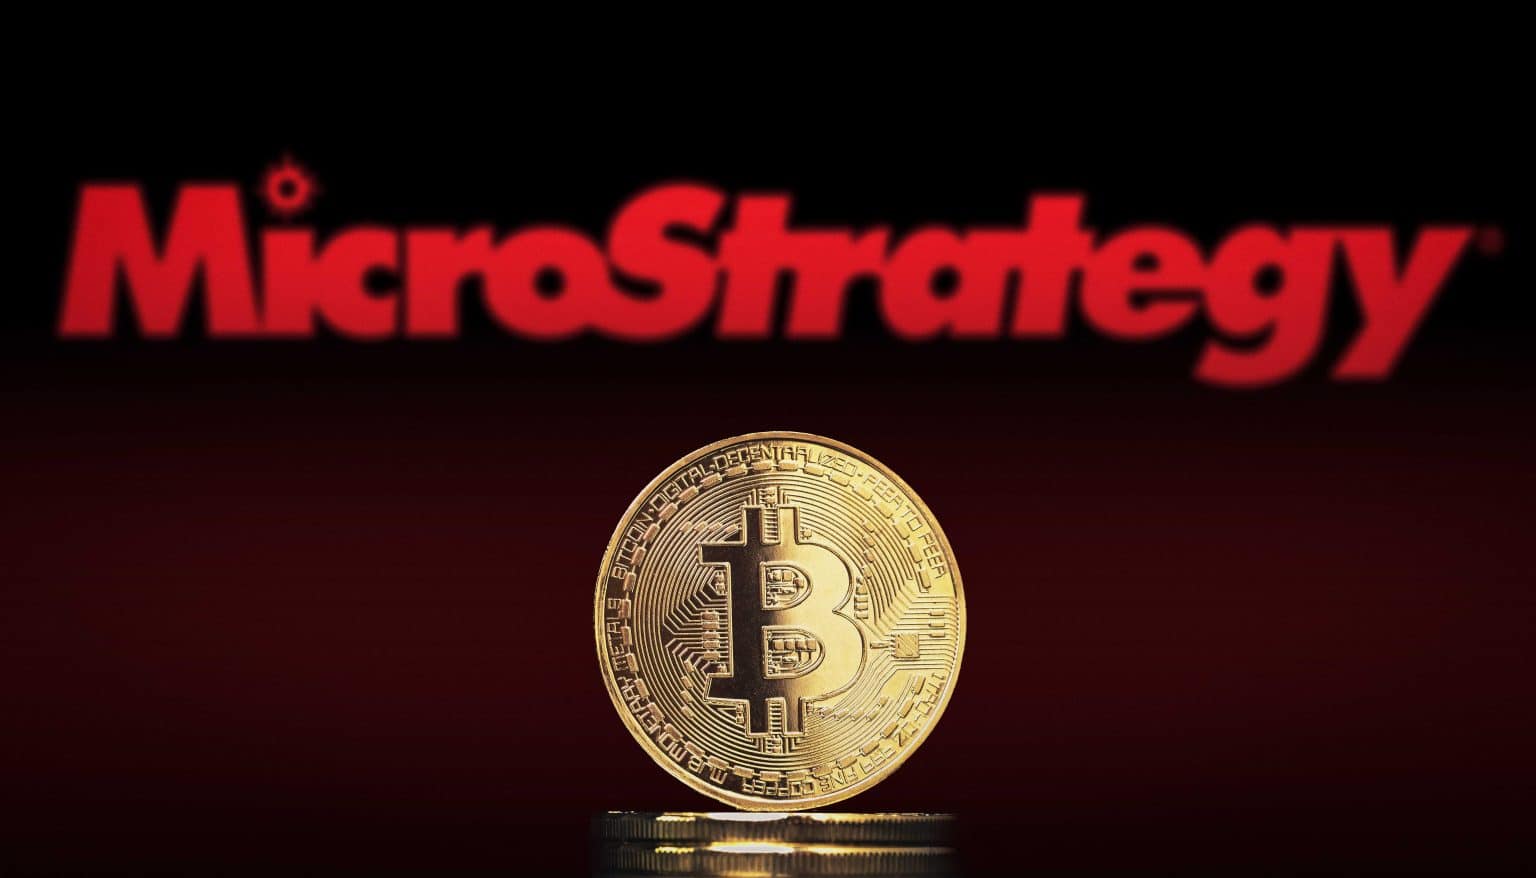 A Bitcoin coin sits in front of the MicroStrategy logo, representing the company's significant investment in Bitcoin.